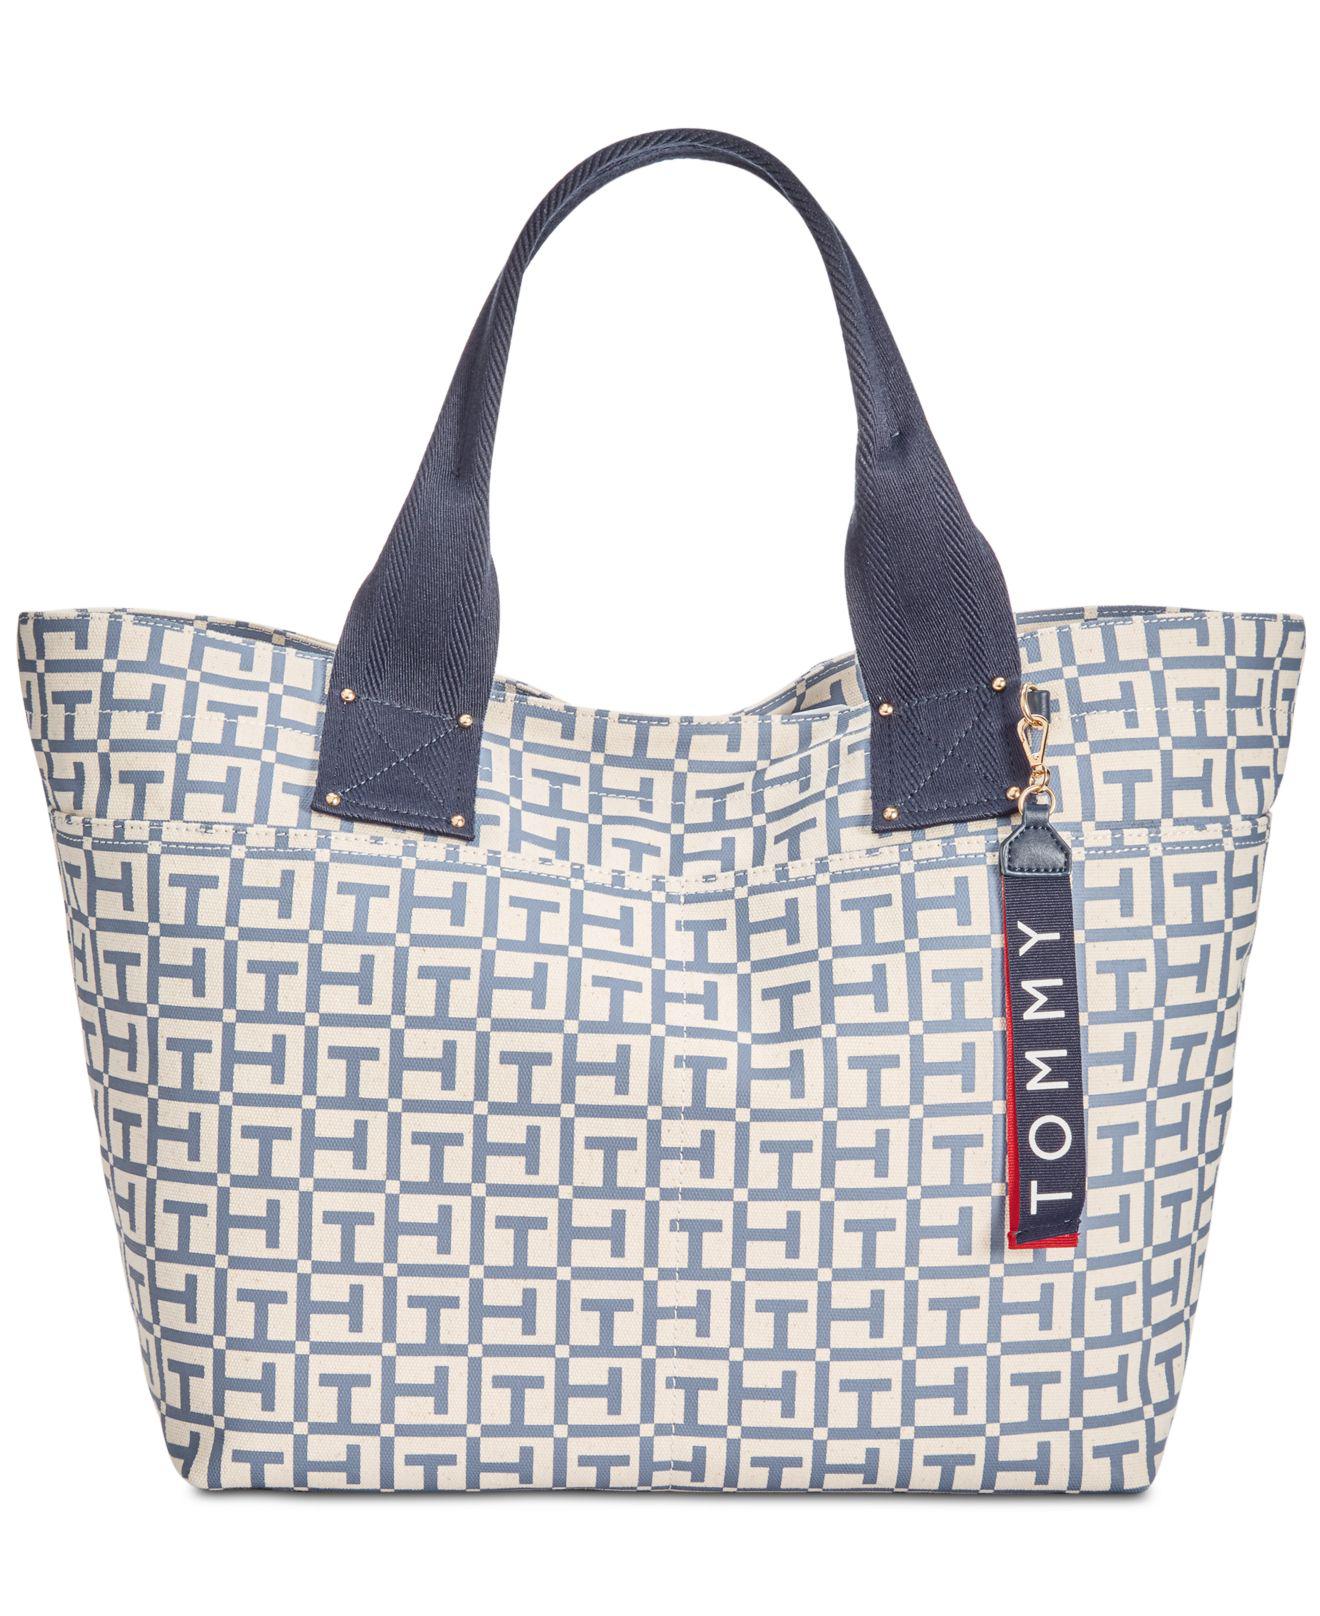 tommy hilfiger canvas tote